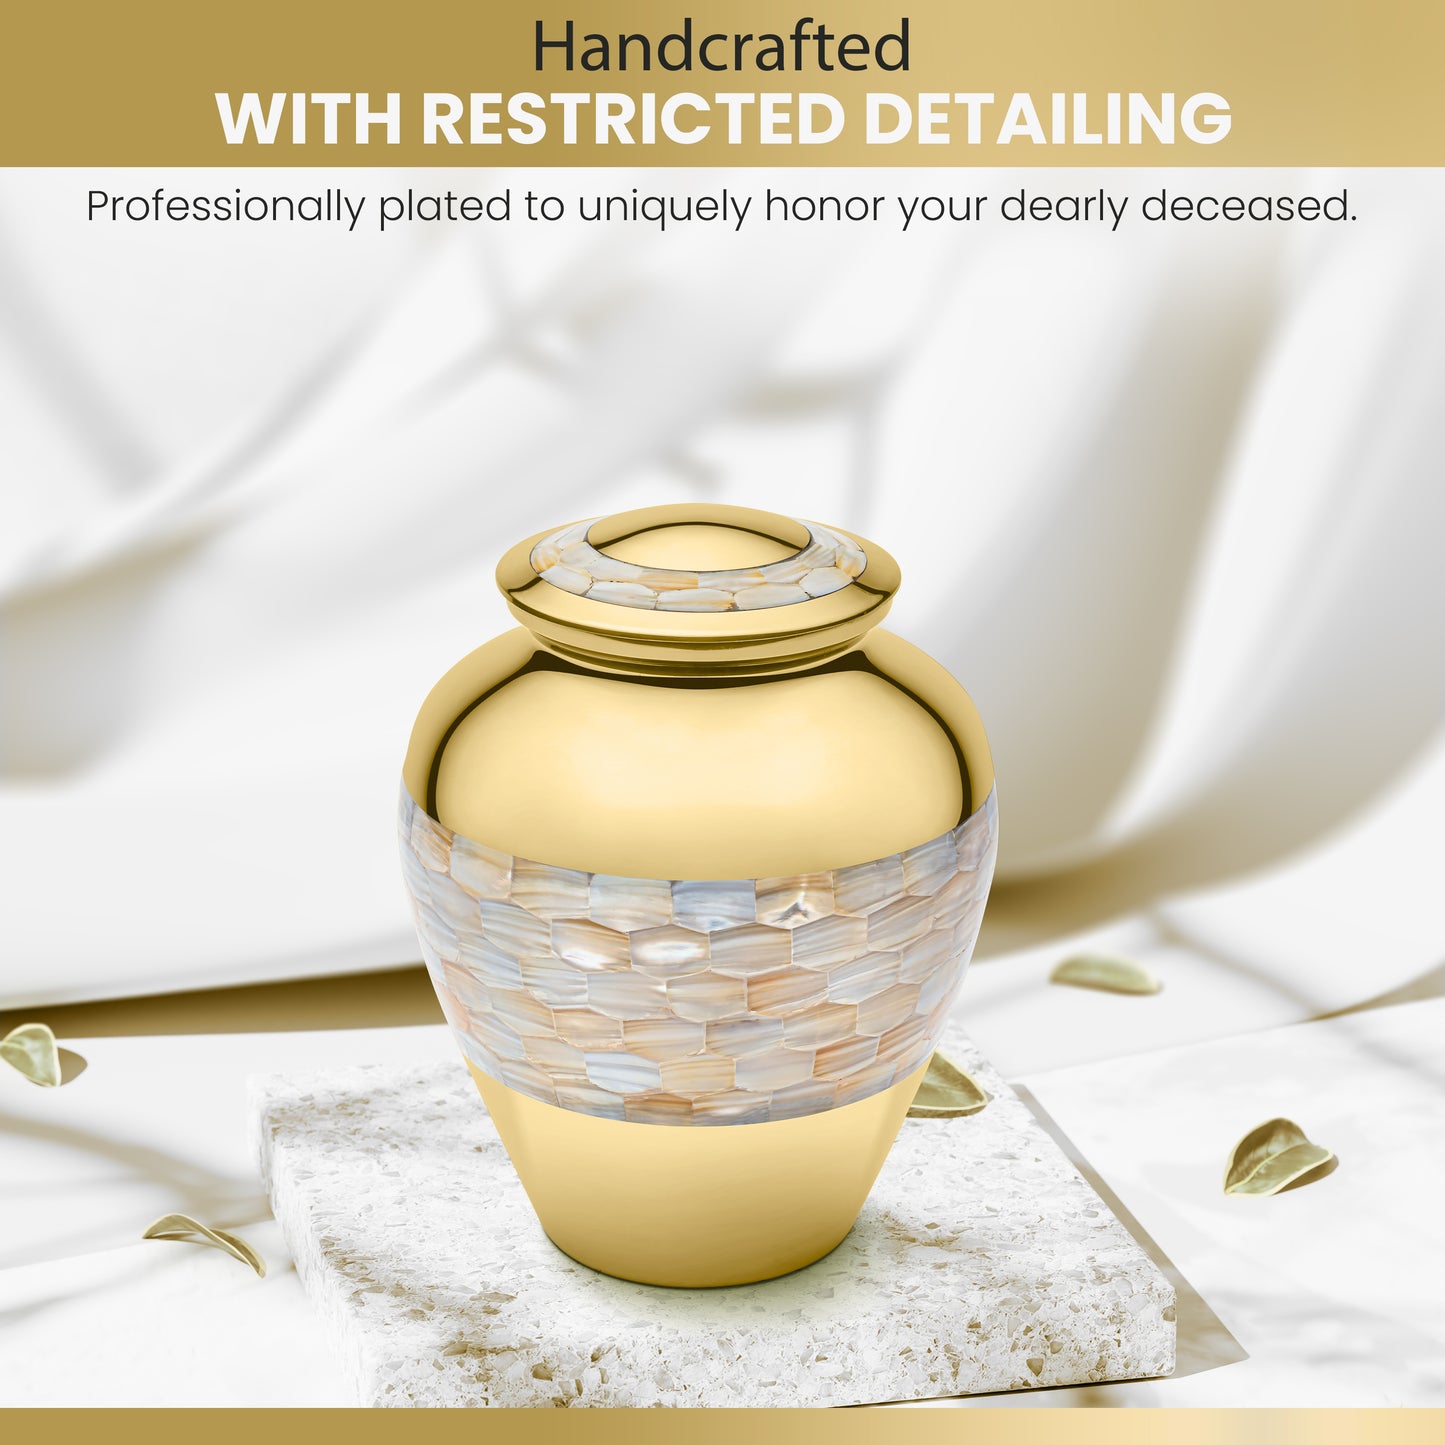 Gold Adult Mother of Pearl Cremation Urn for Ashes